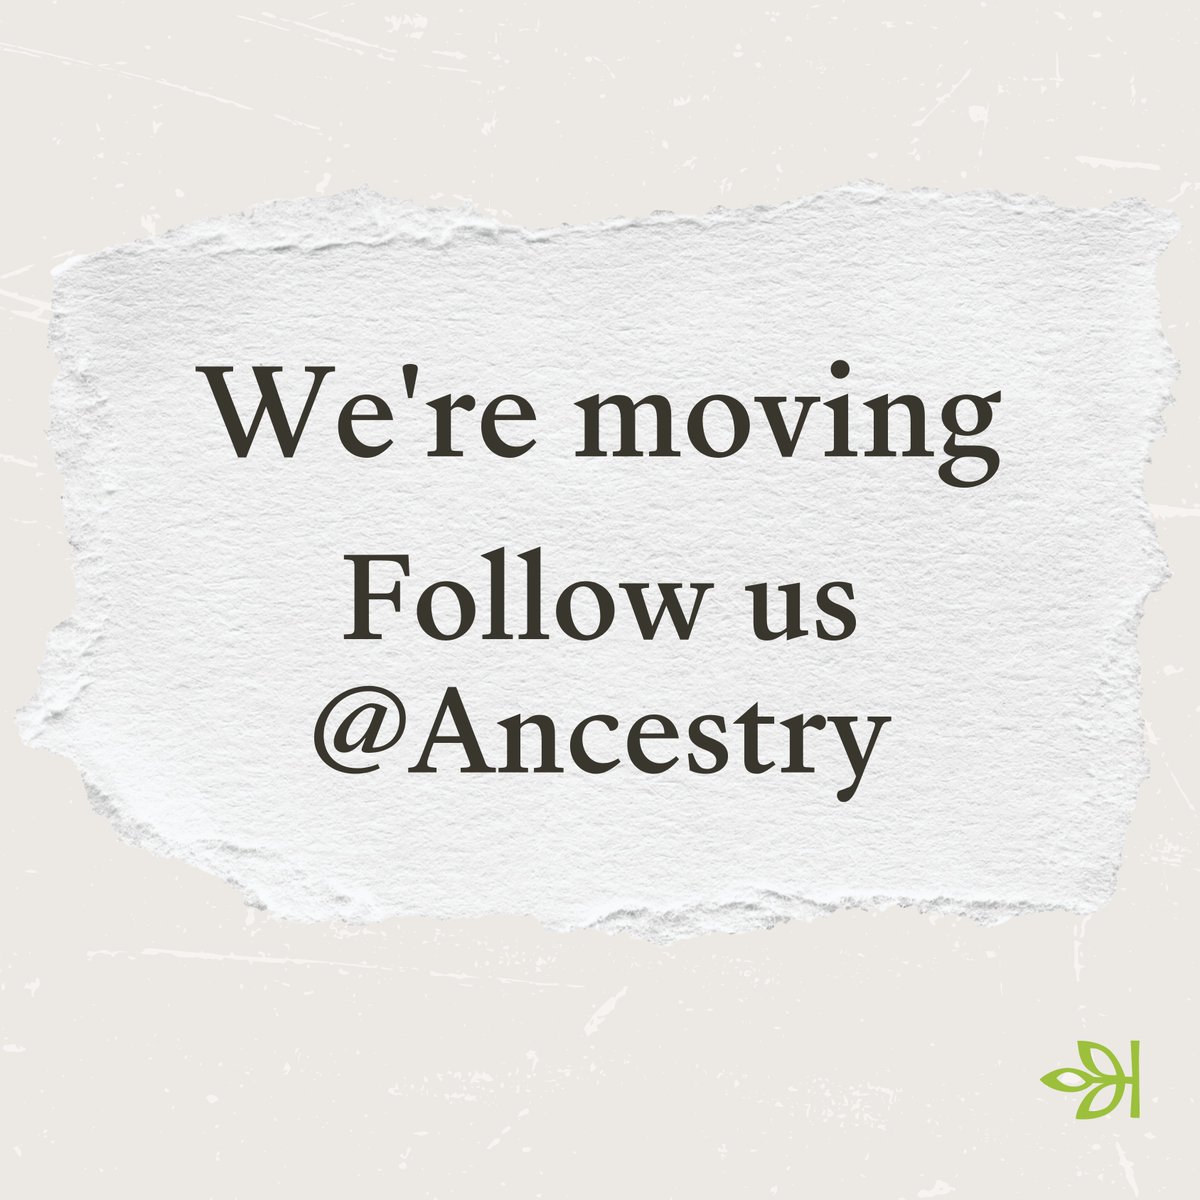 Thank you for being part of the Ancestry family. To continue the journey, follow us @Ancestry and join our global community, where you can discover and share amazing family stories.